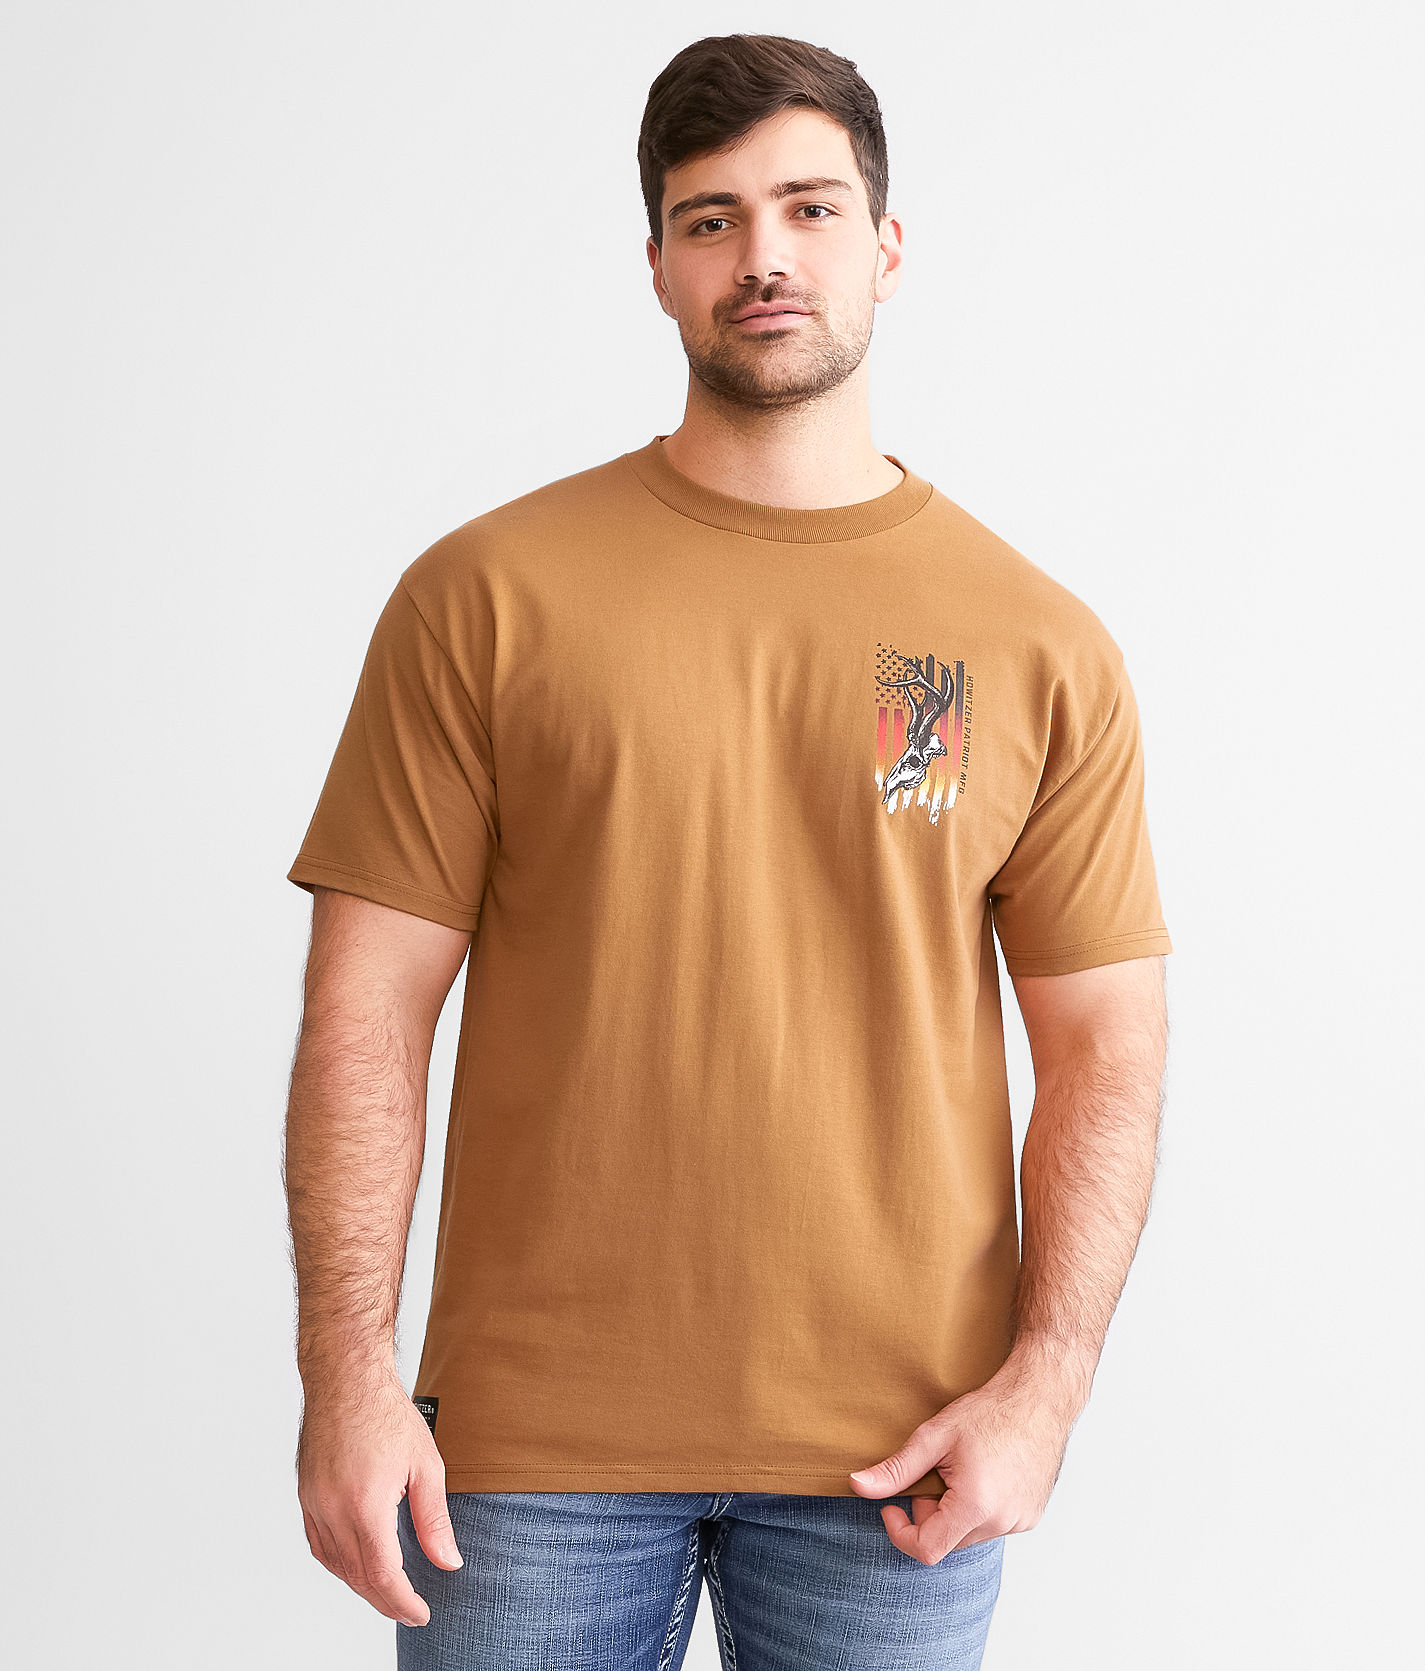 Howitzer Freedom Trail T-Shirt - Men's T-Shirts in Brown Sugar | Buckle